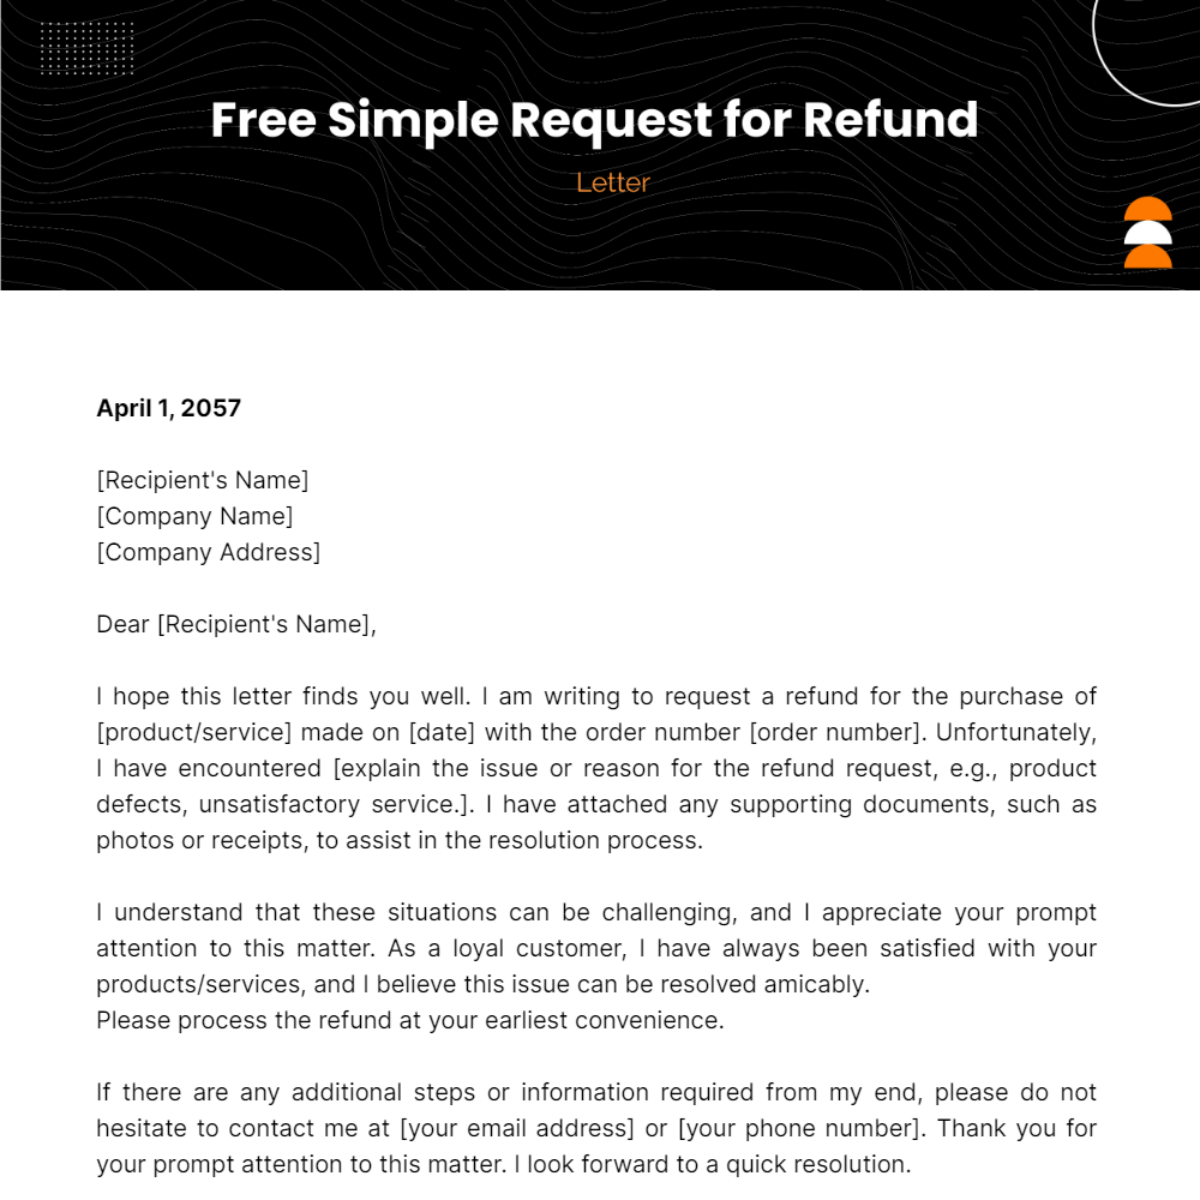 Simple Request for Refund Letter Template